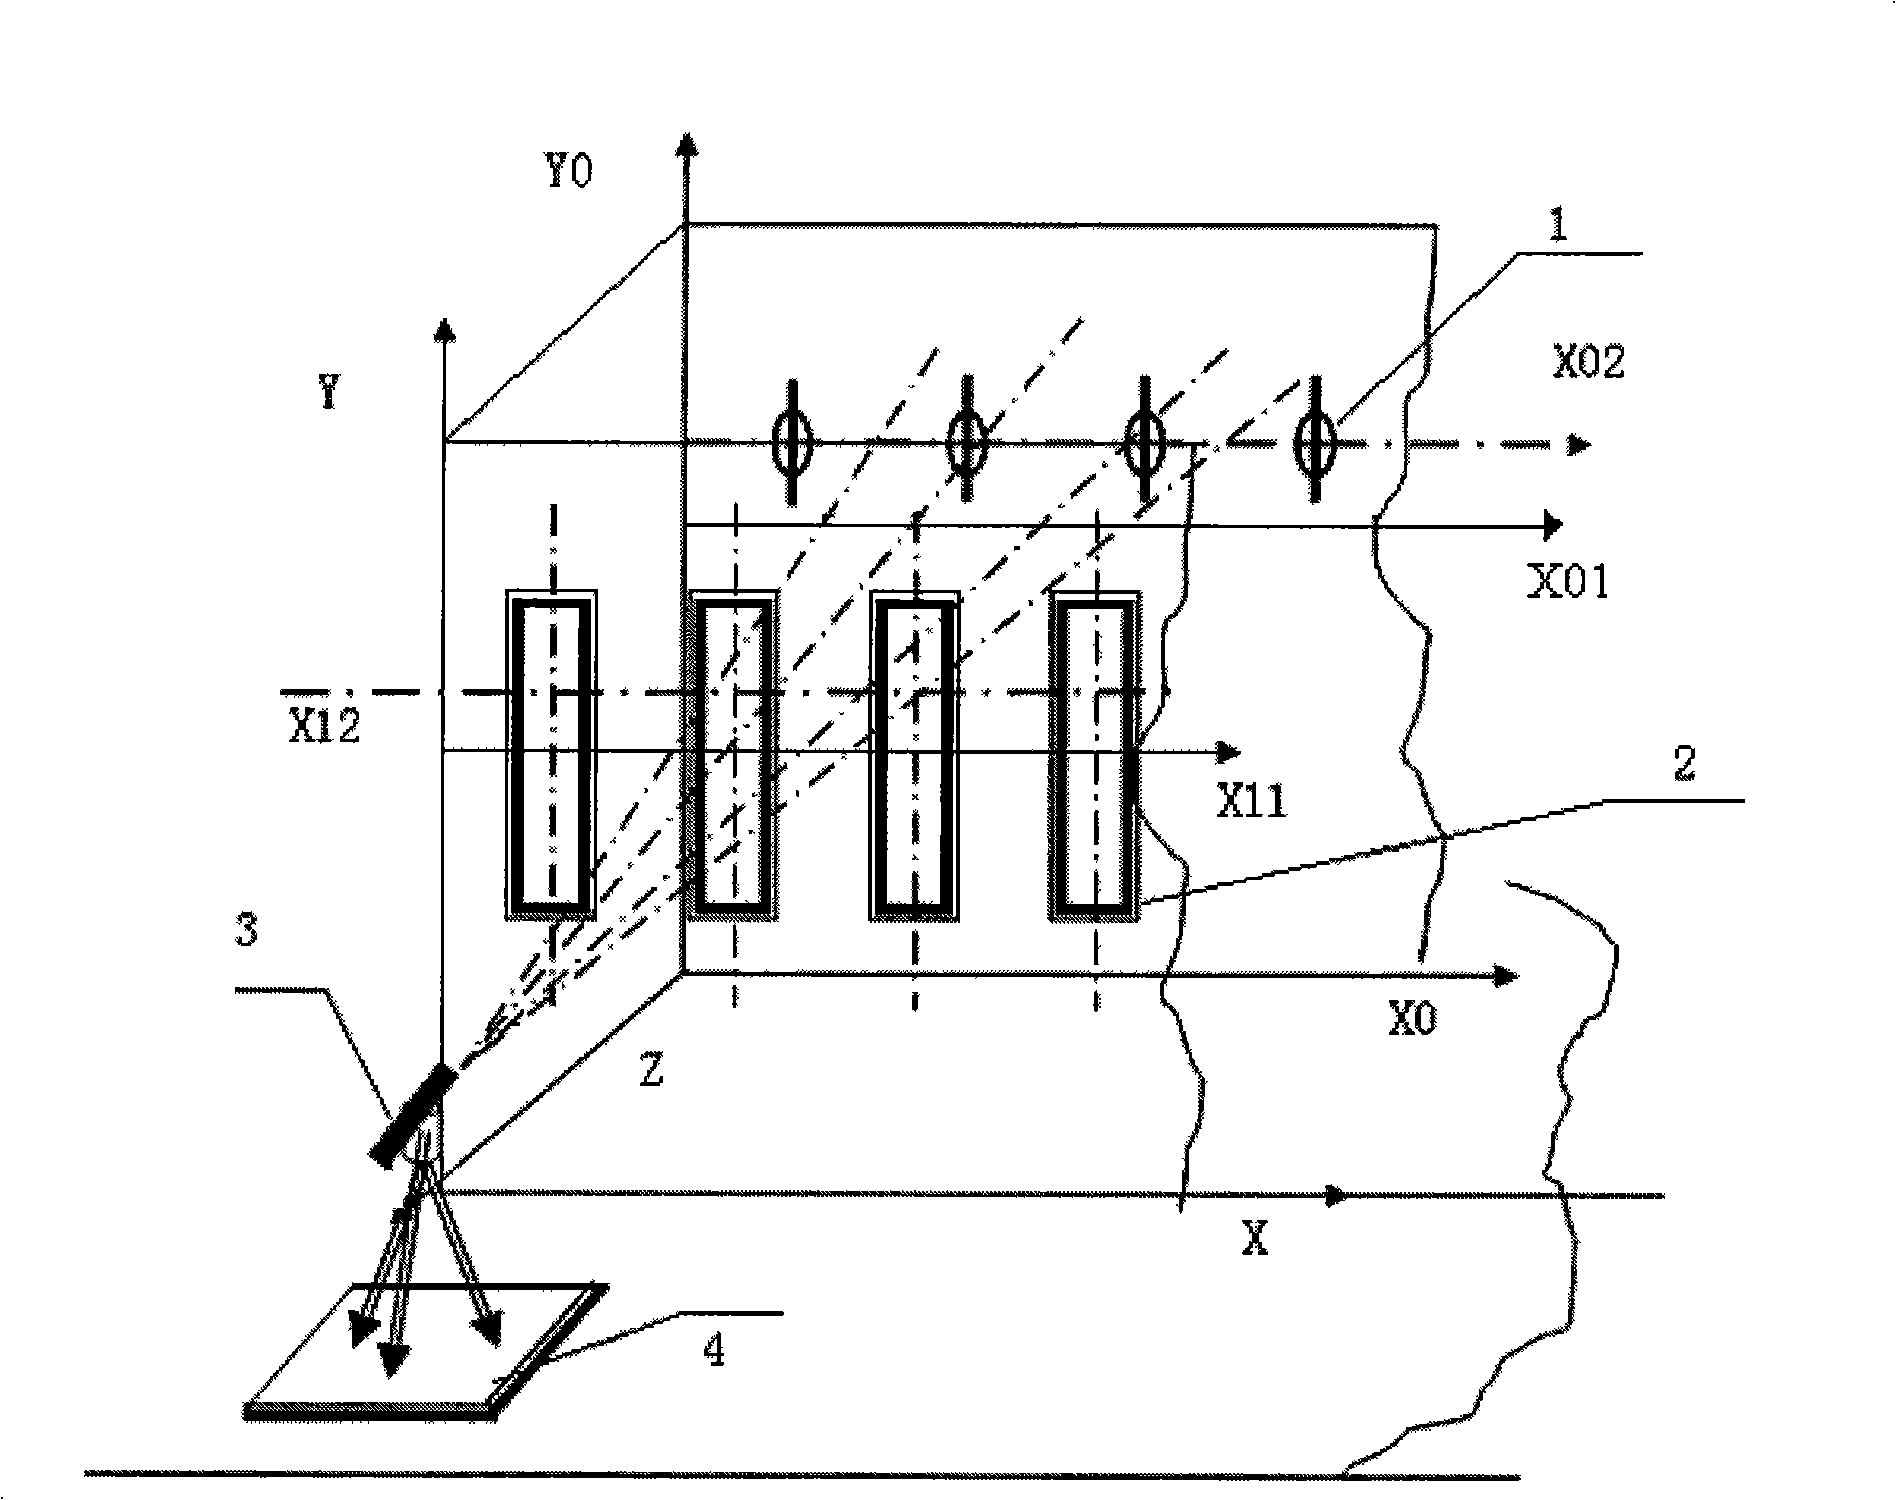 Thermal radiation pin support mounting method